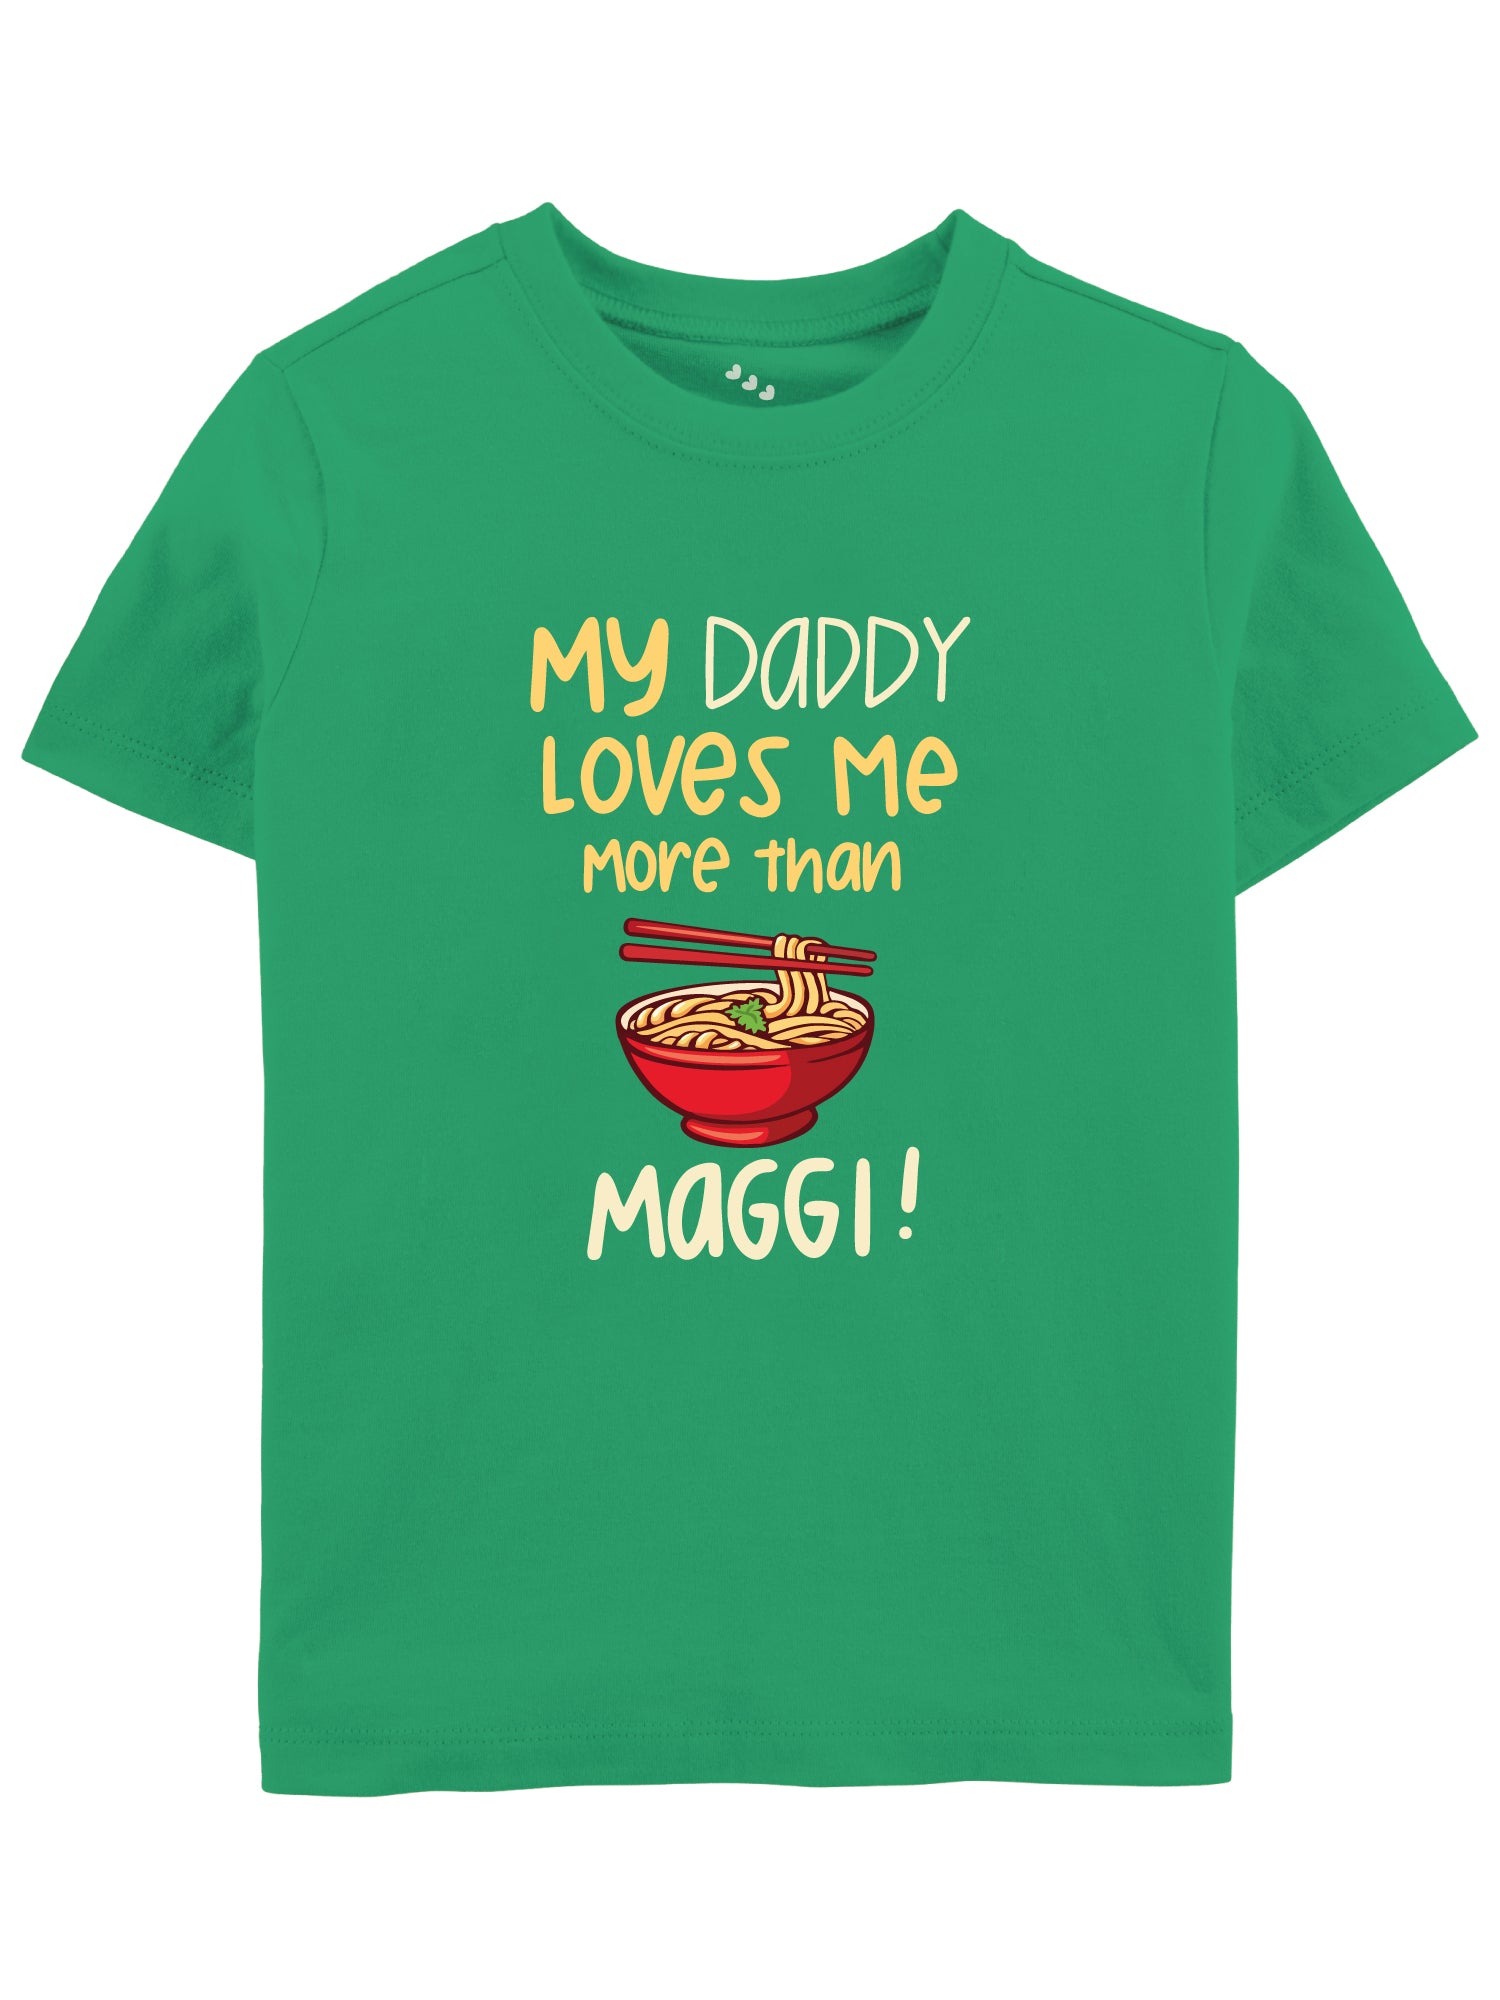 My Daddy Loves me More than Maggi - Tee